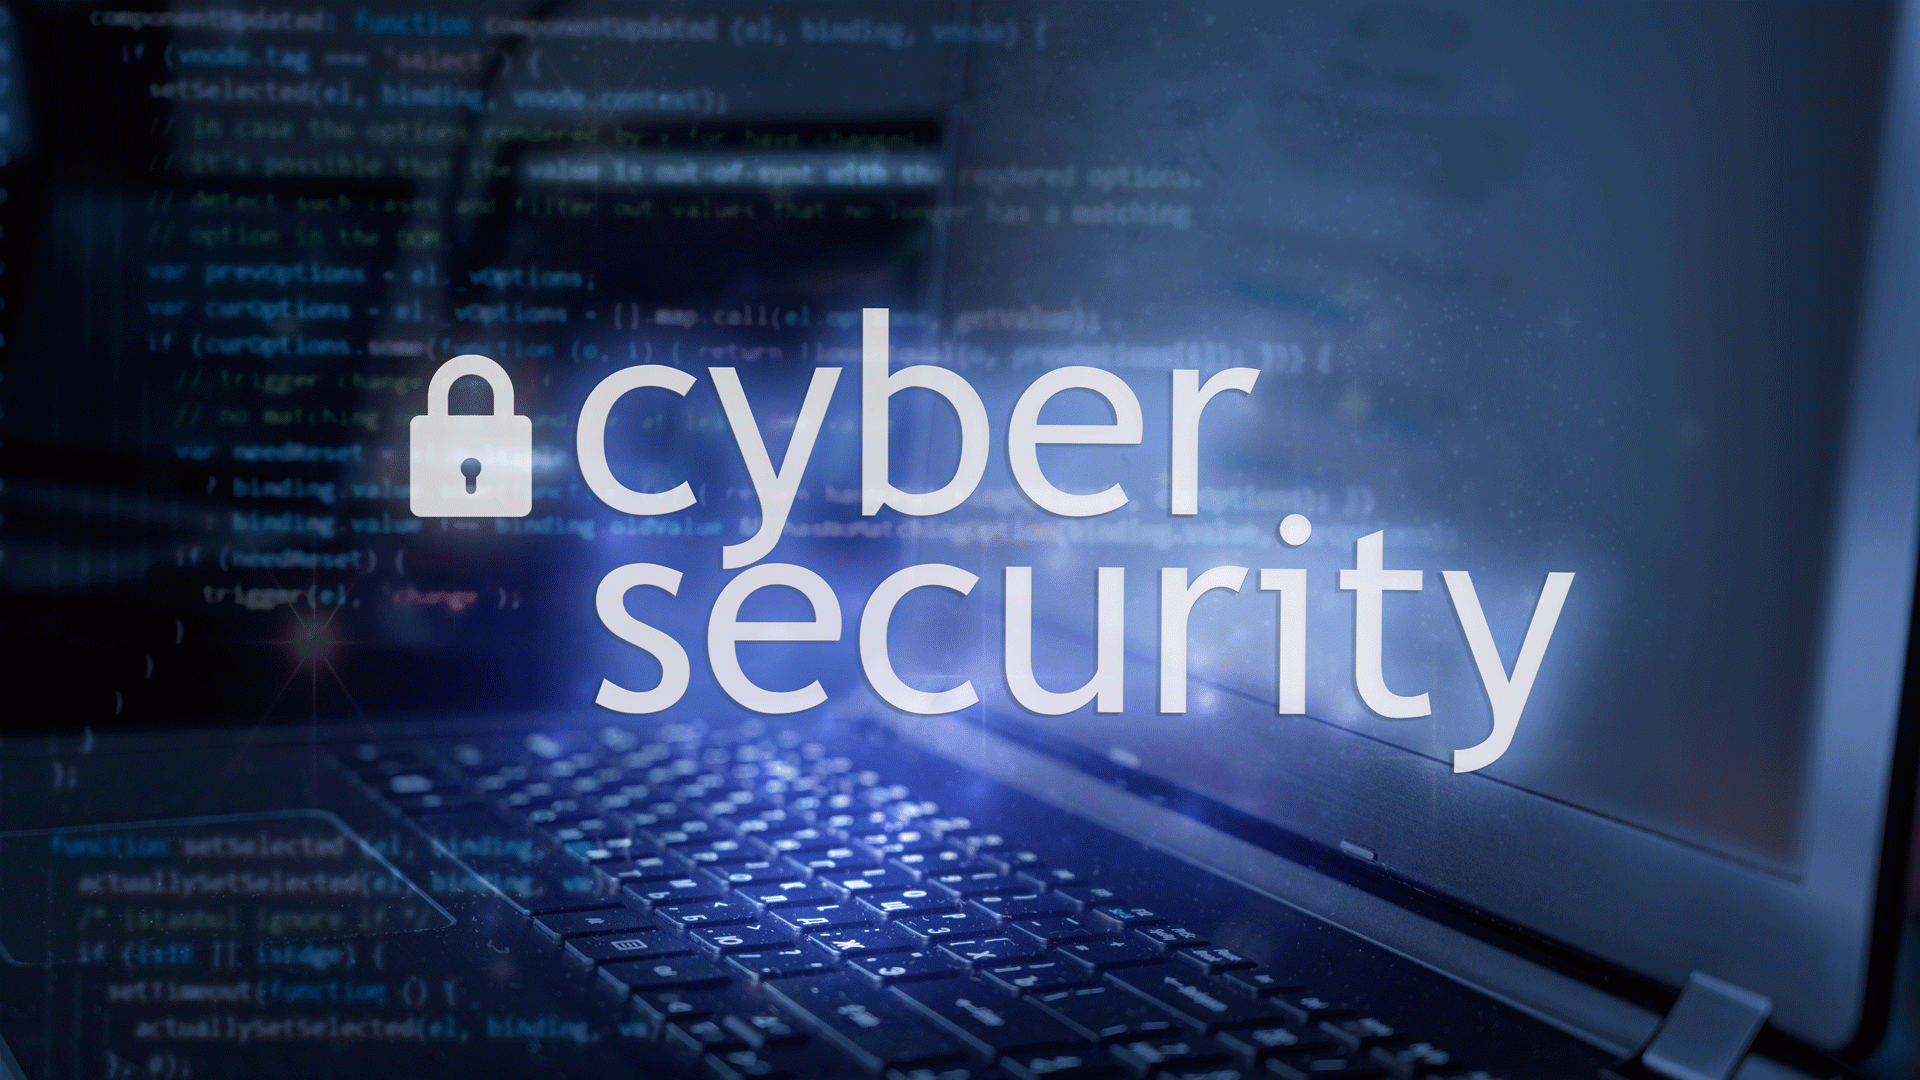 Cyber security training must not be a tick box exercise